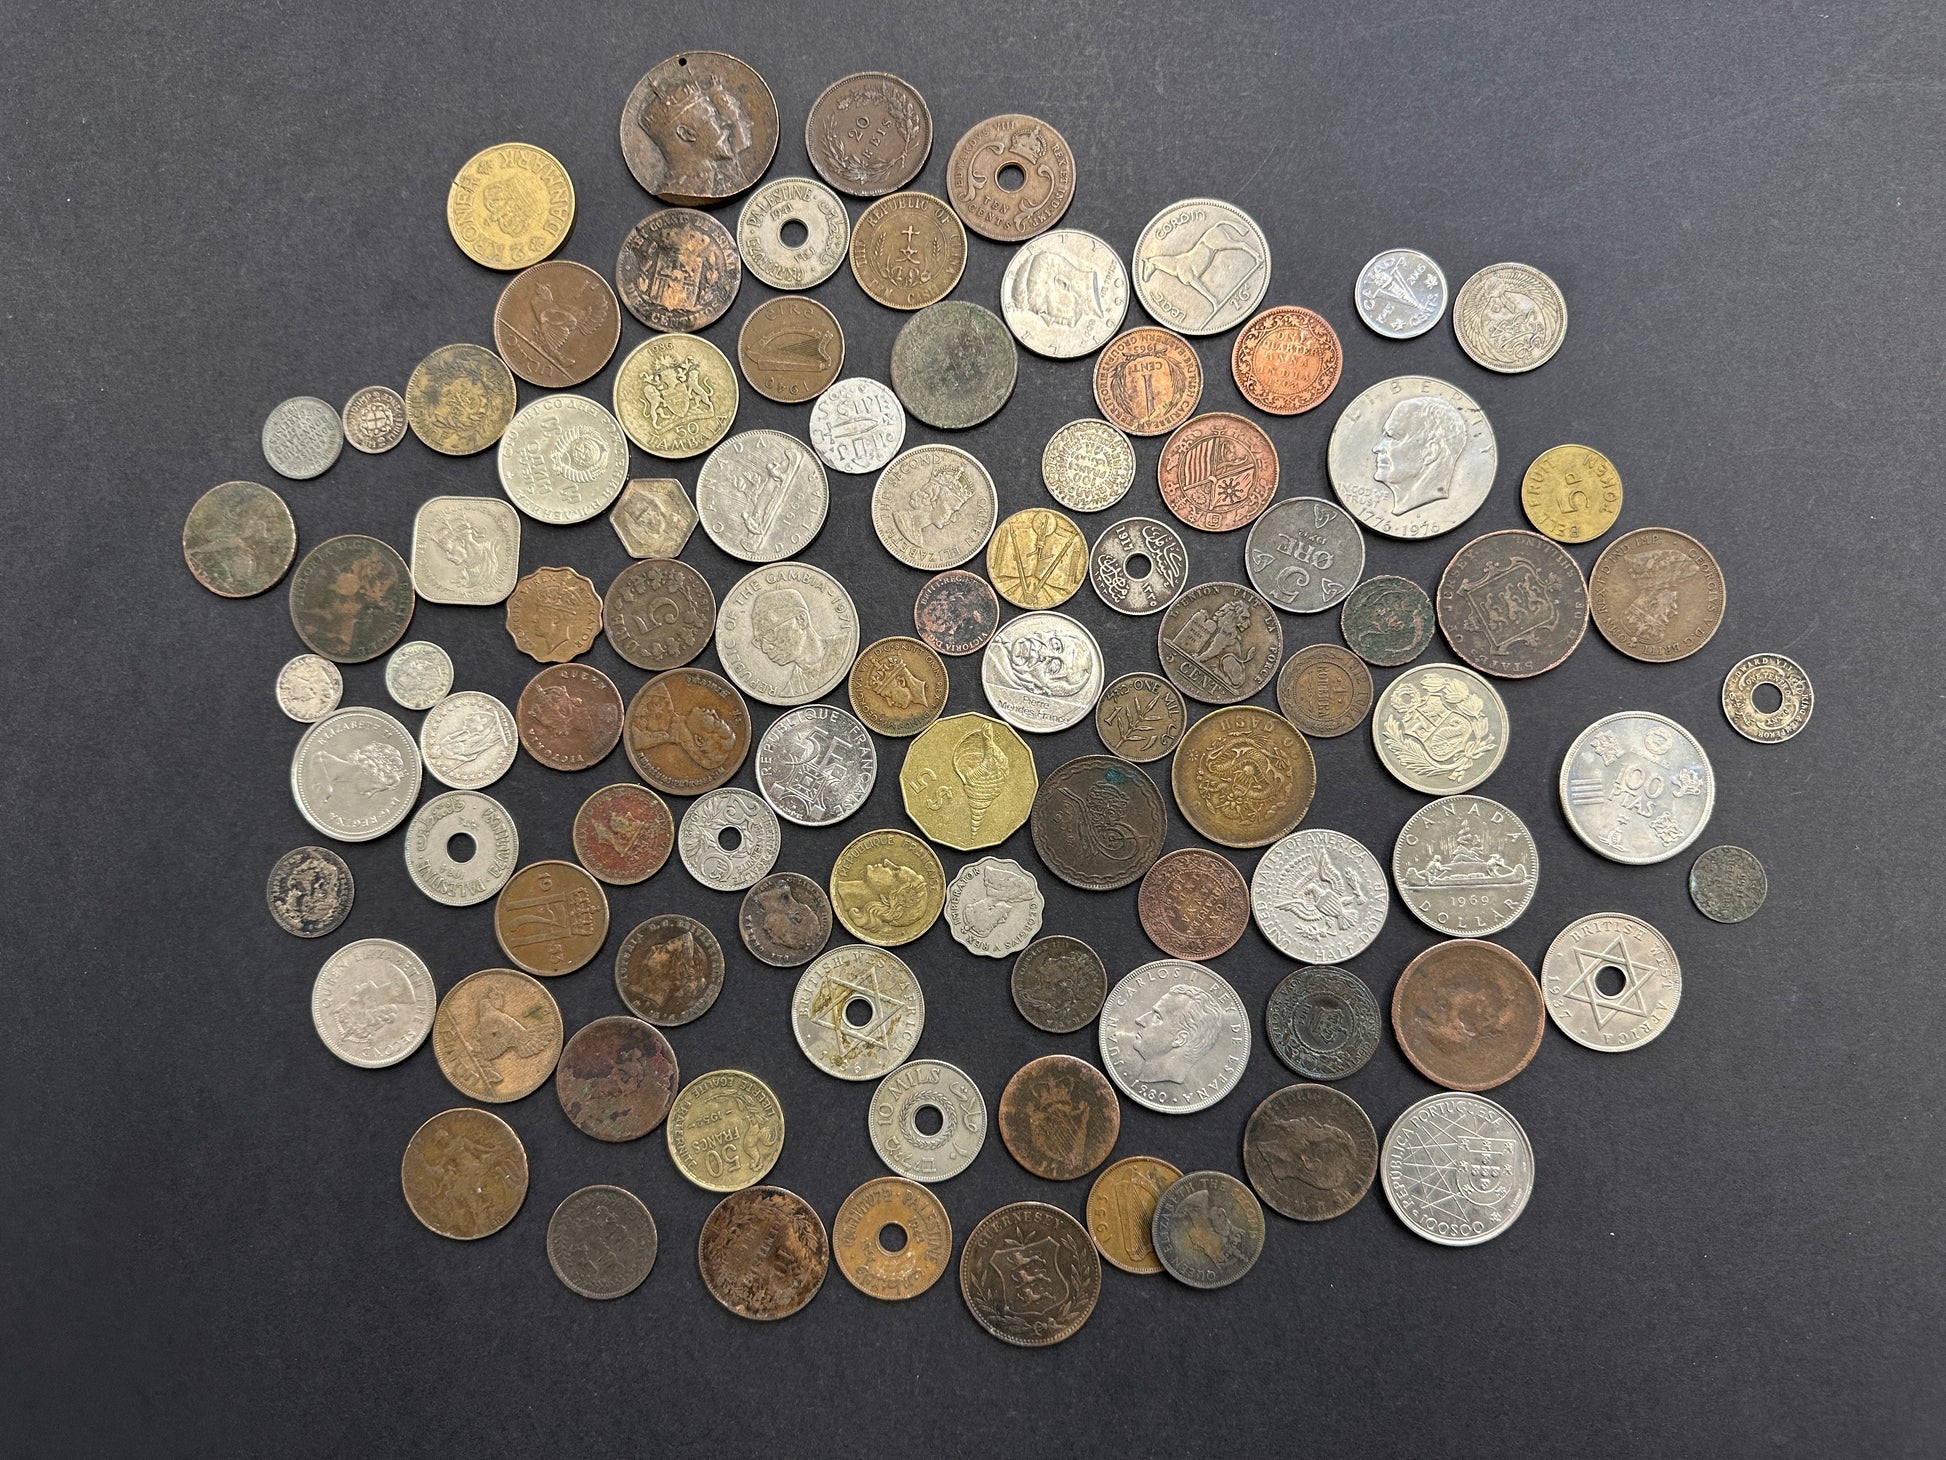 Rare and Collectable World Coins - Sought After Selection